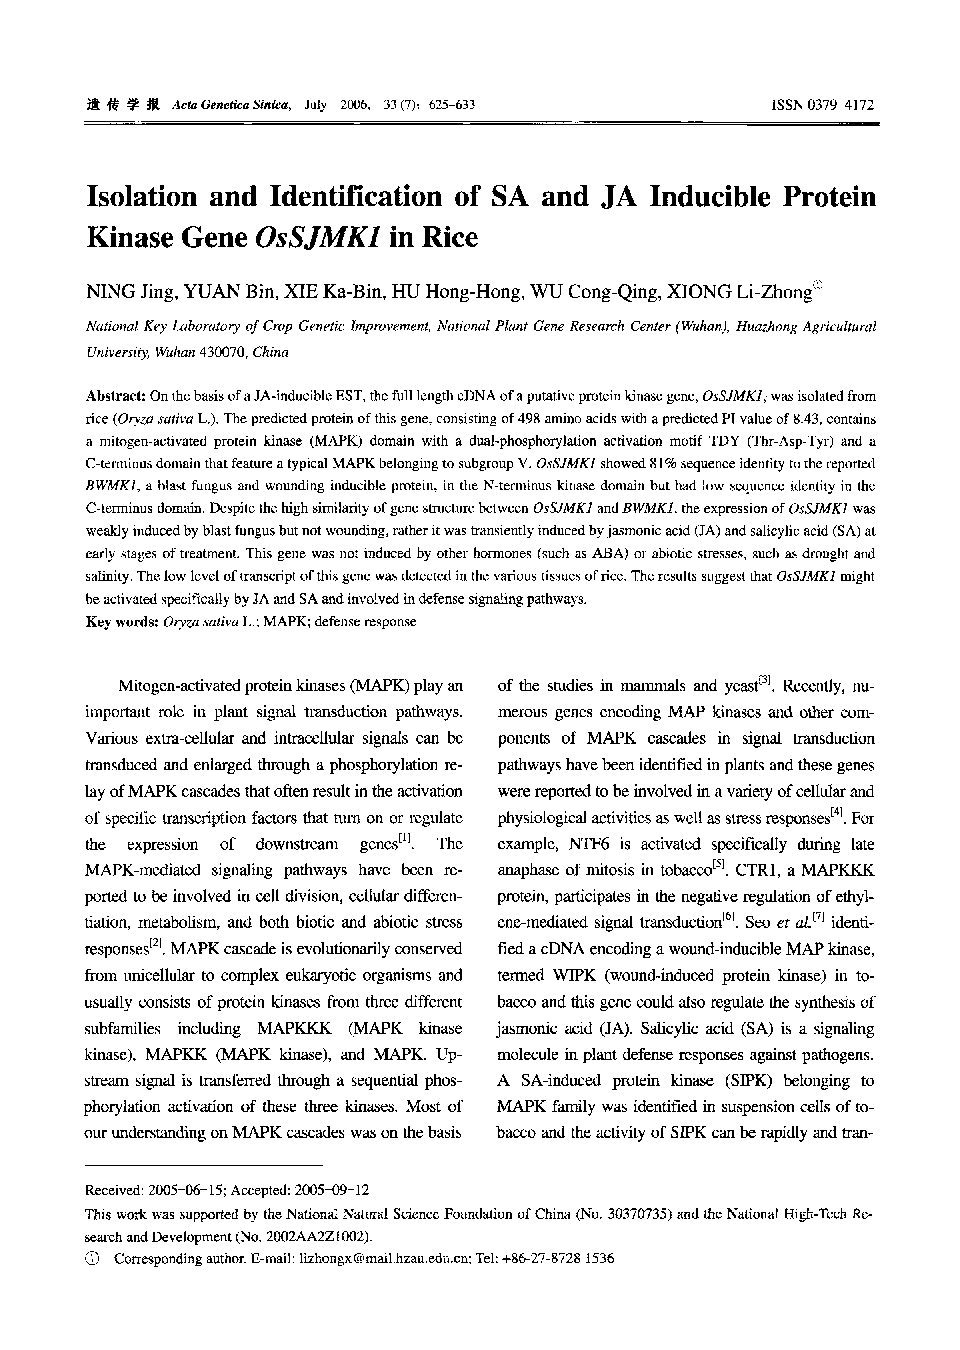 Isolation and Identification of SA and JA Inducible Protein Kinase Gene OsSJMK1 in Rice 